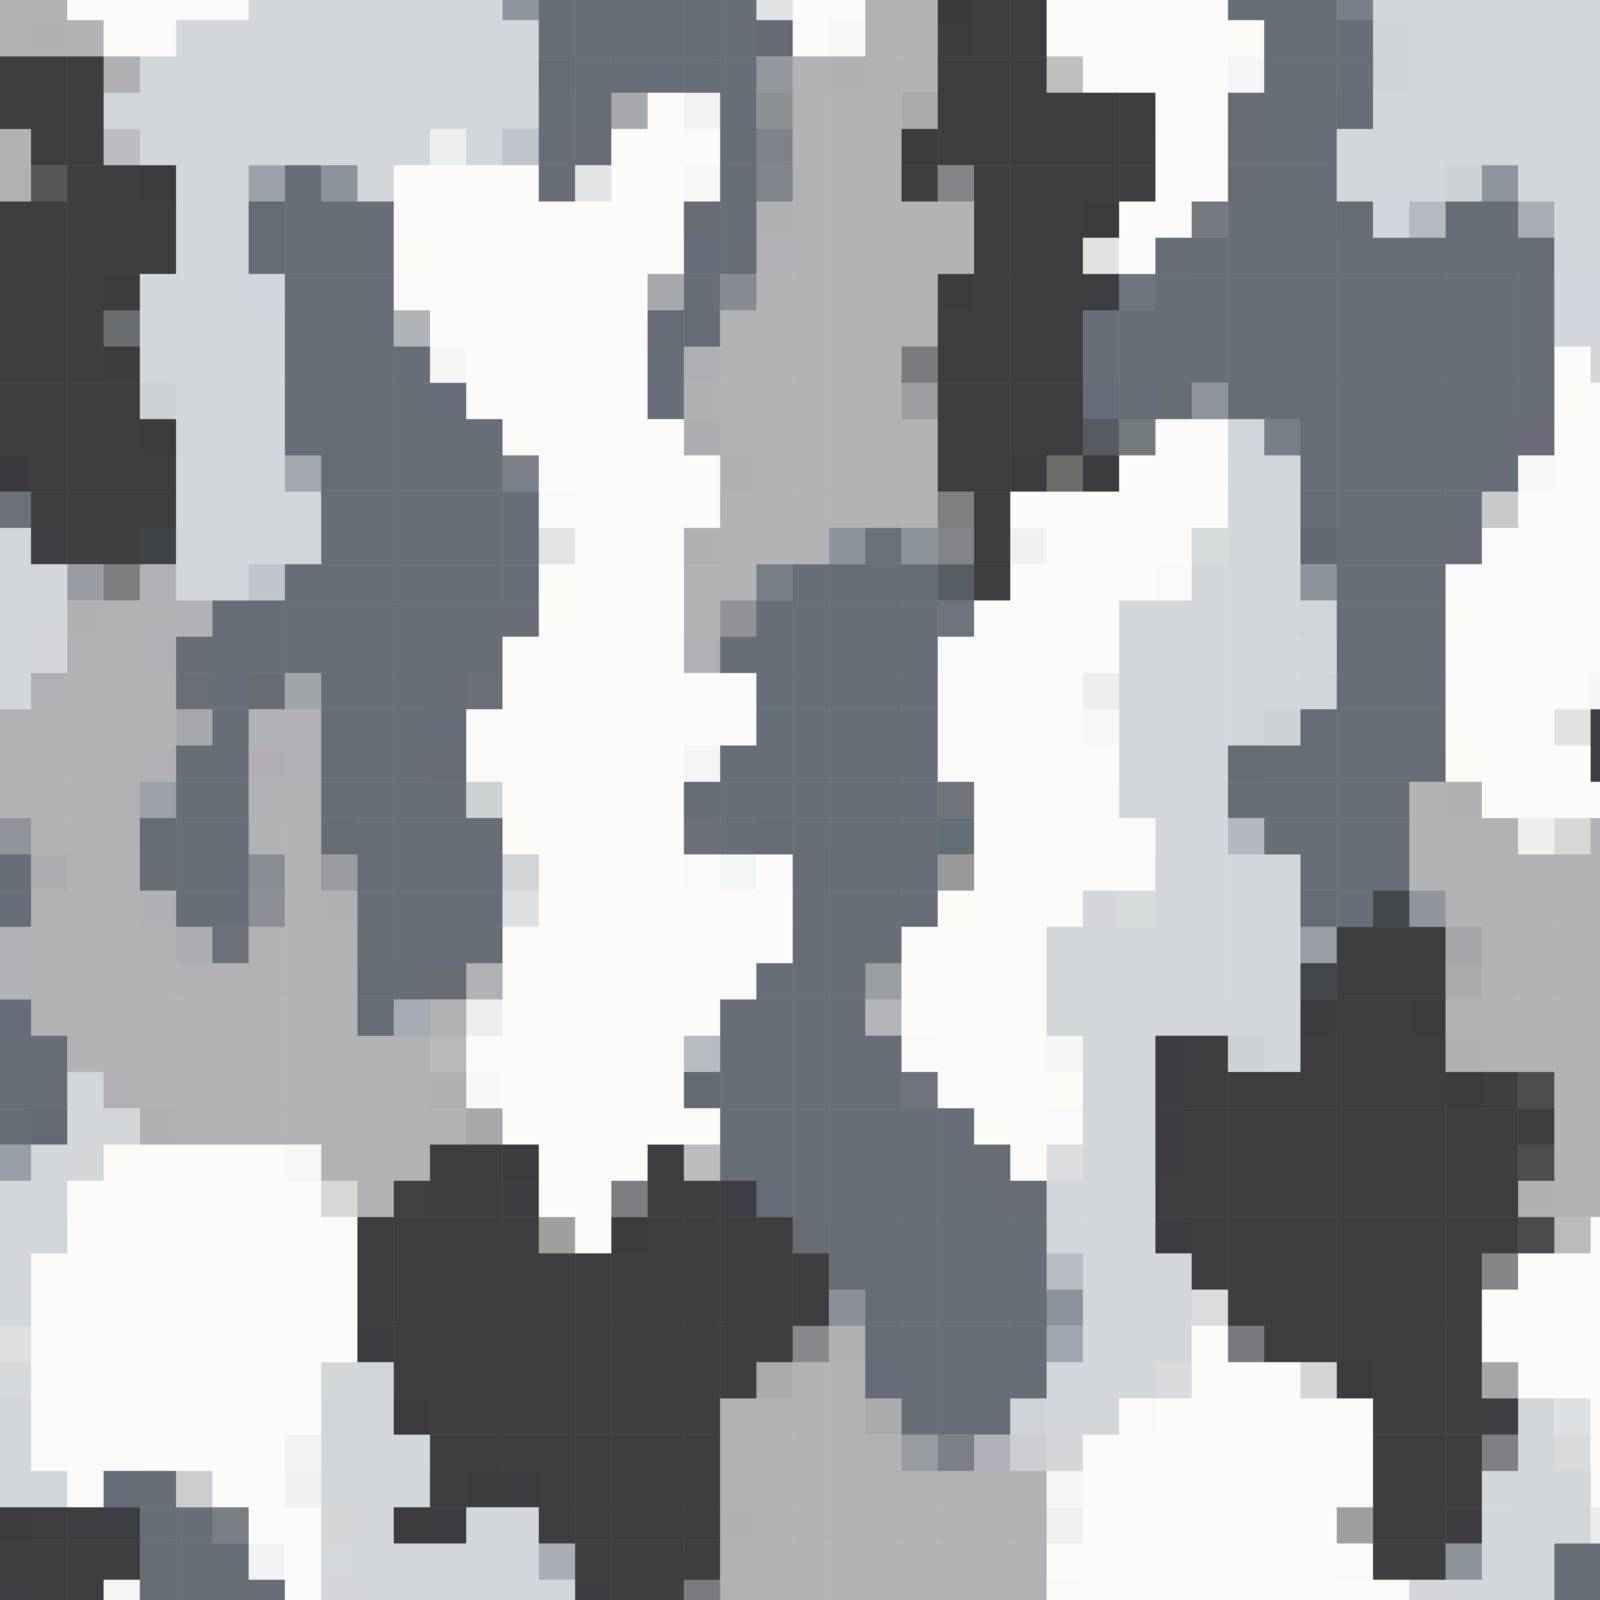 Urban Camouflage Background. Army Abstract Modern Military Pattern. Grey Pixel Fabric Textile Print for Uniforms and Weapons.